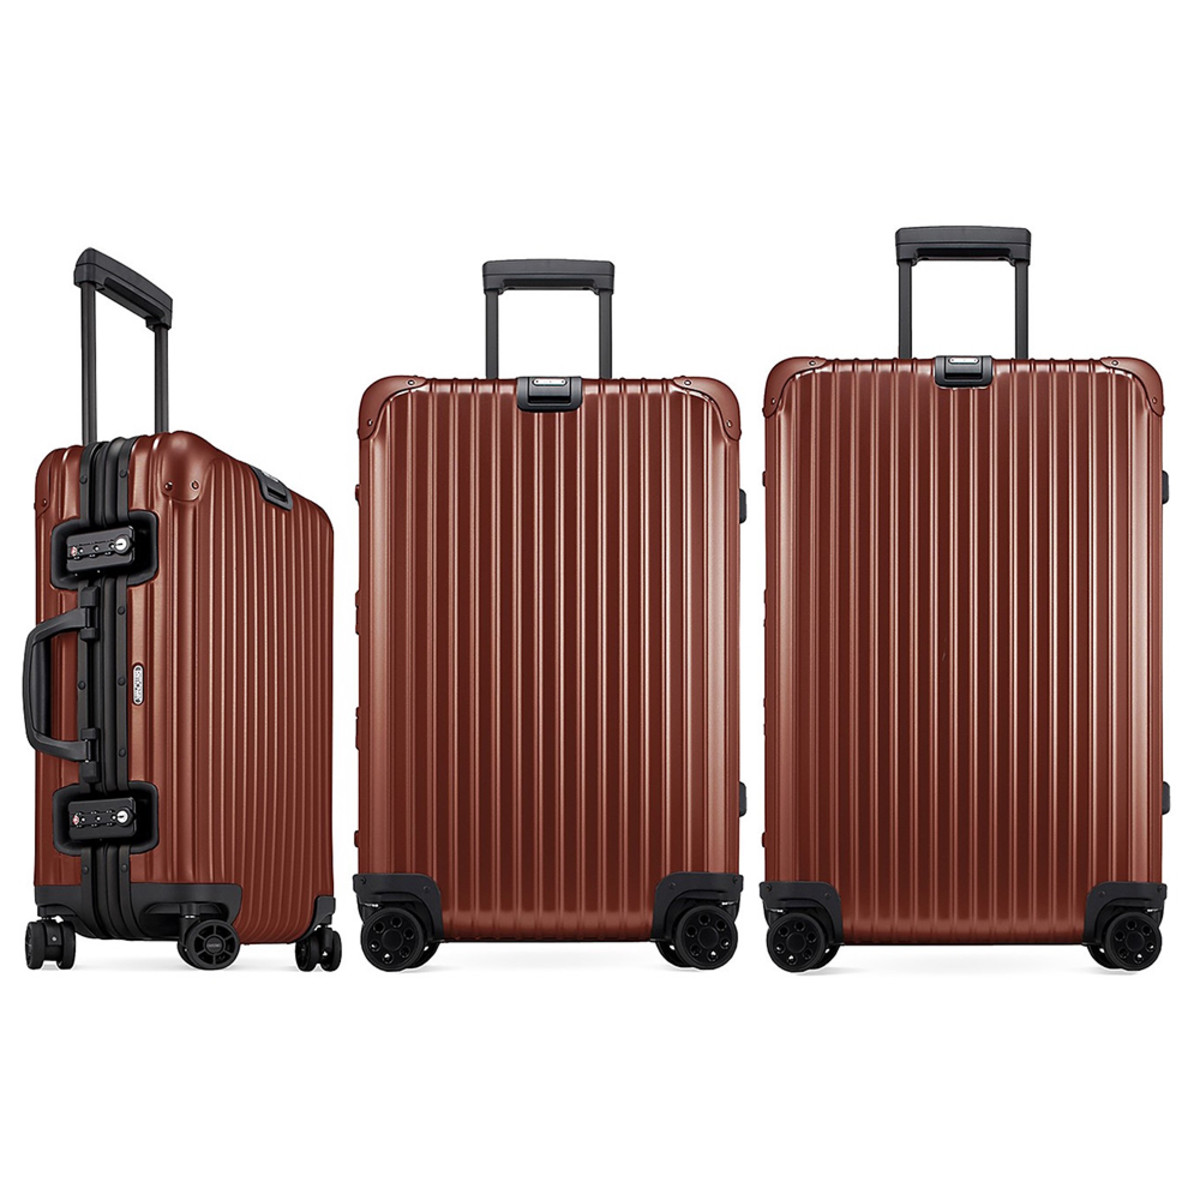 Rimowa's famous grooves get updated in Copper for Bloomingdale's - Acquire